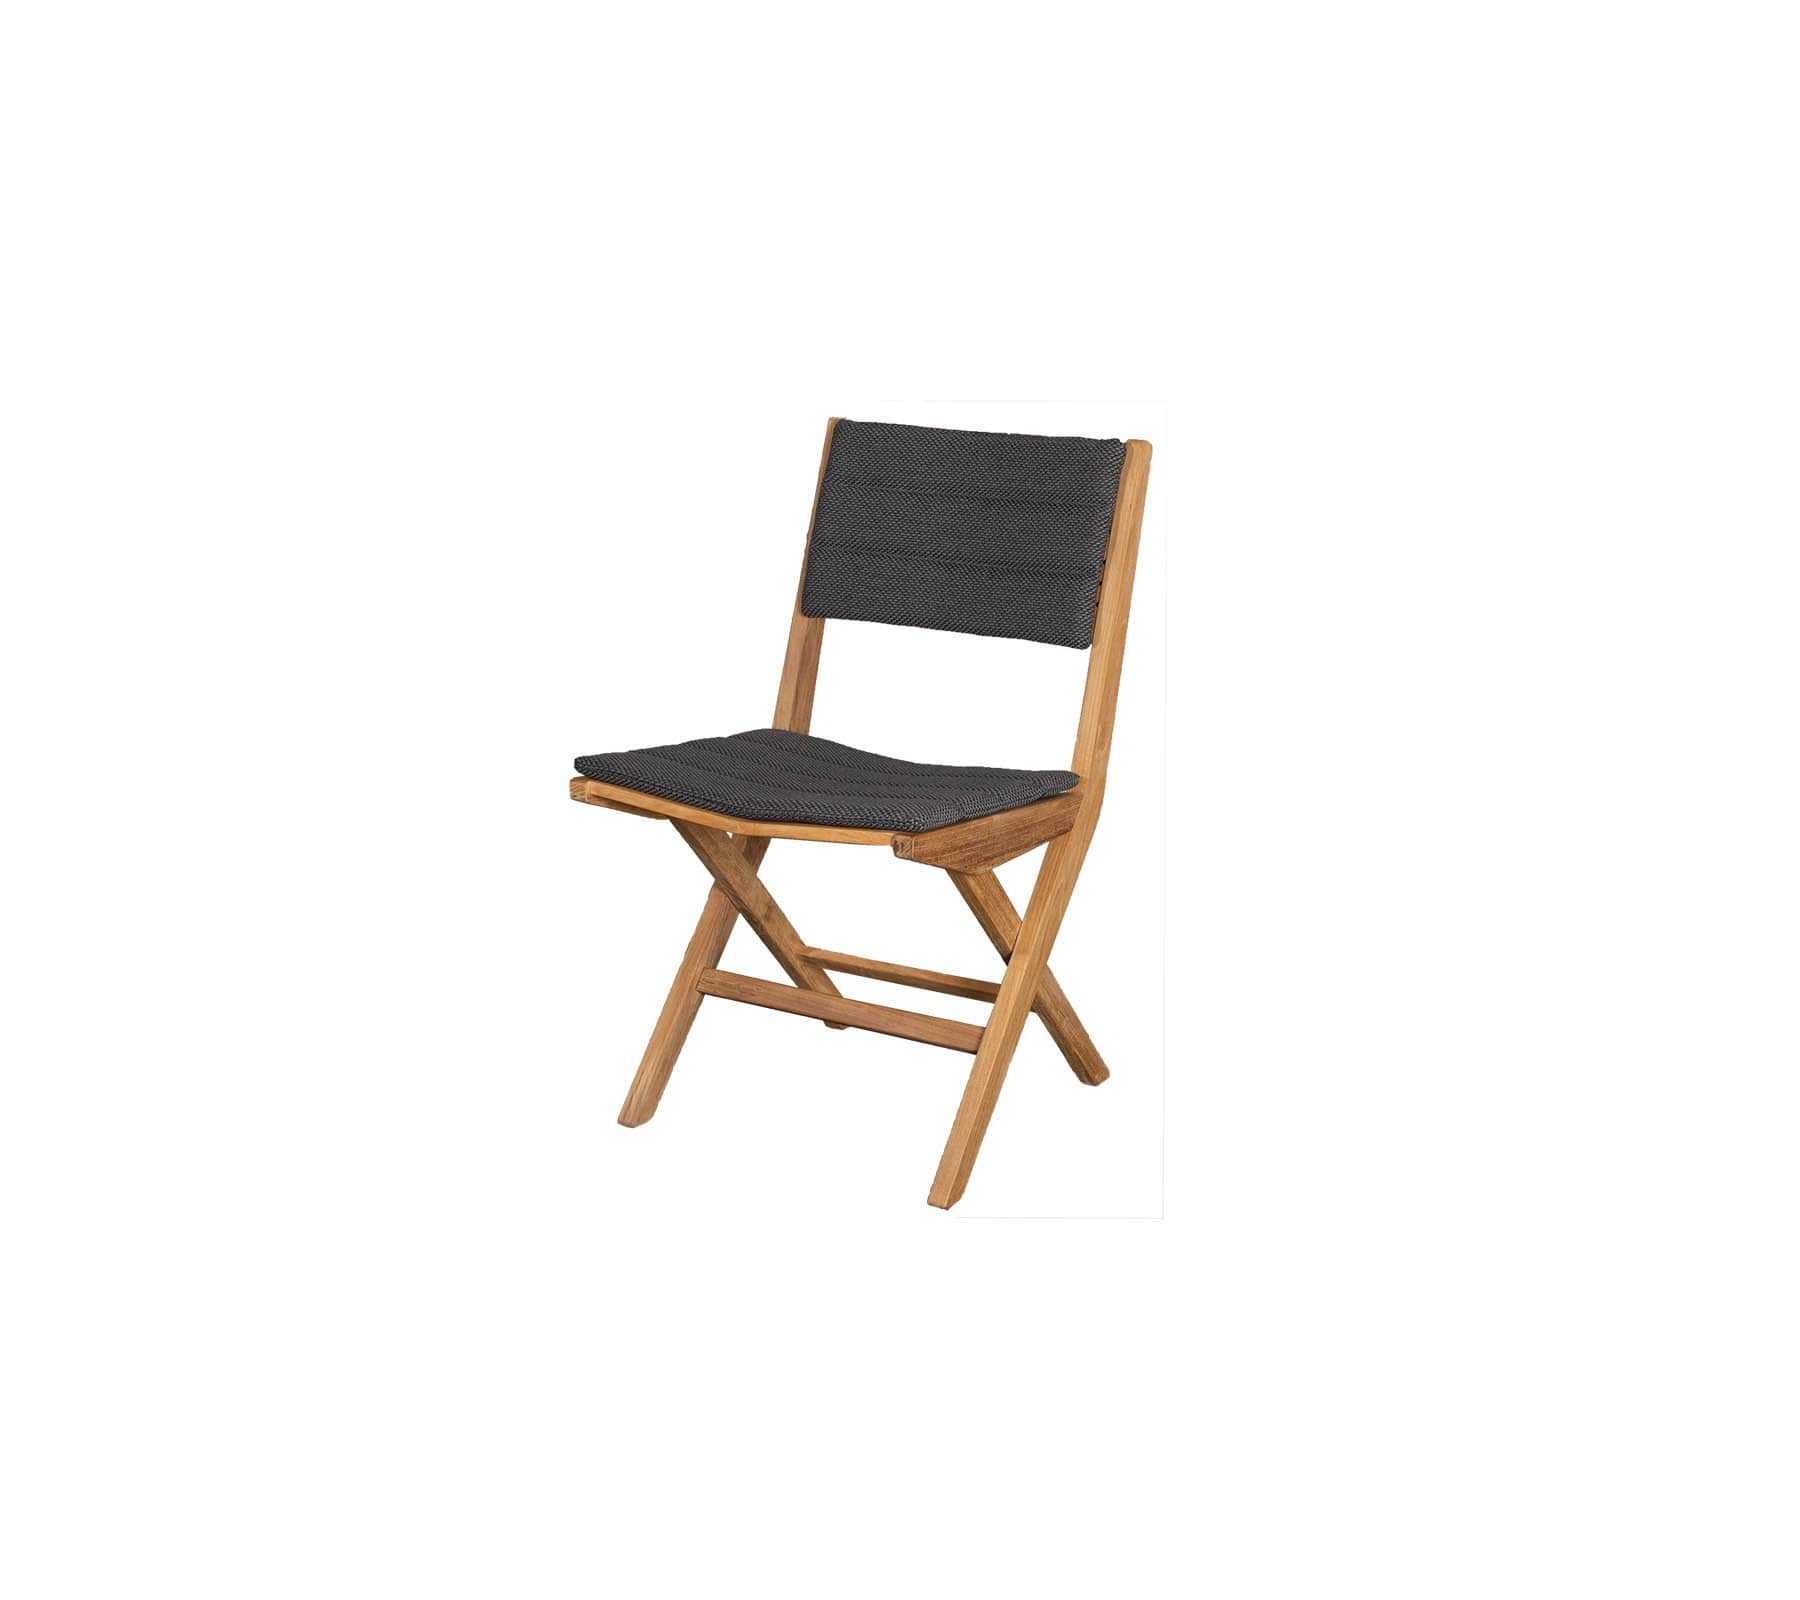  Boxhill's Flip Folding Outdoor Teak Dining chair with  Dark Grey Cushion front side view in white background